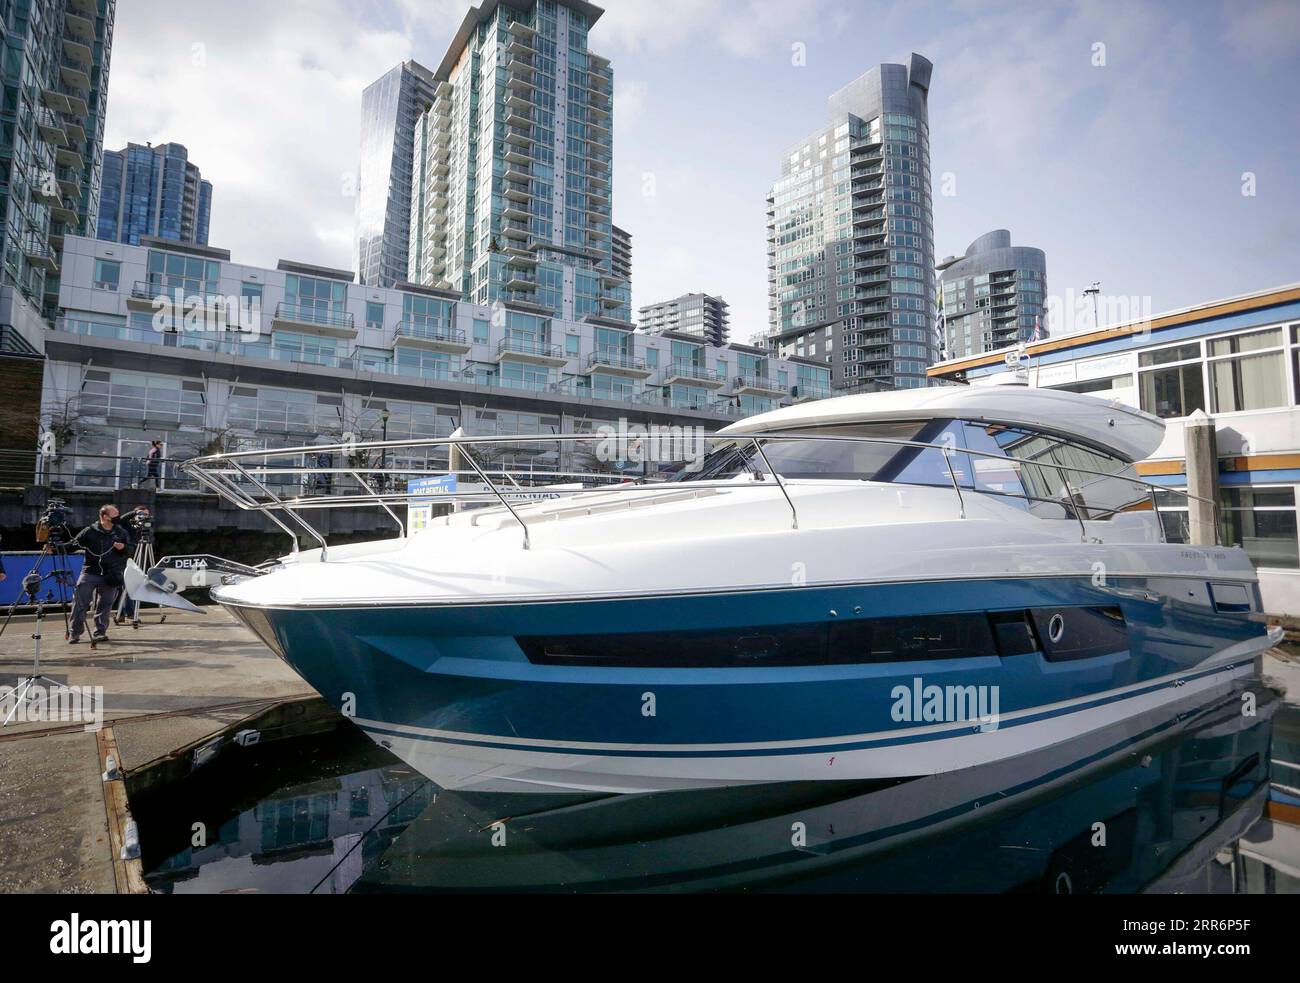 210224 -- VANCOUVER, Feb. 24, 2021 -- A cruiser boat for display during the 2021 Vancouver International Boat Show is seen at a harbour in Vancouver, British Columbia, Canada, Feb. 24, 2021. The Vancouver International Boat Show which goes virtual this year due to the COVID-19 pandemic, kicked off on Wednesday, showcasing hundreds of new boats, products and accessories online. Photo by /Xinhua CANADA-VANCOUVER-INTERNATIONAL BOAT SHOW LiangxSen PUBLICATIONxNOTxINxCHN Stock Photo